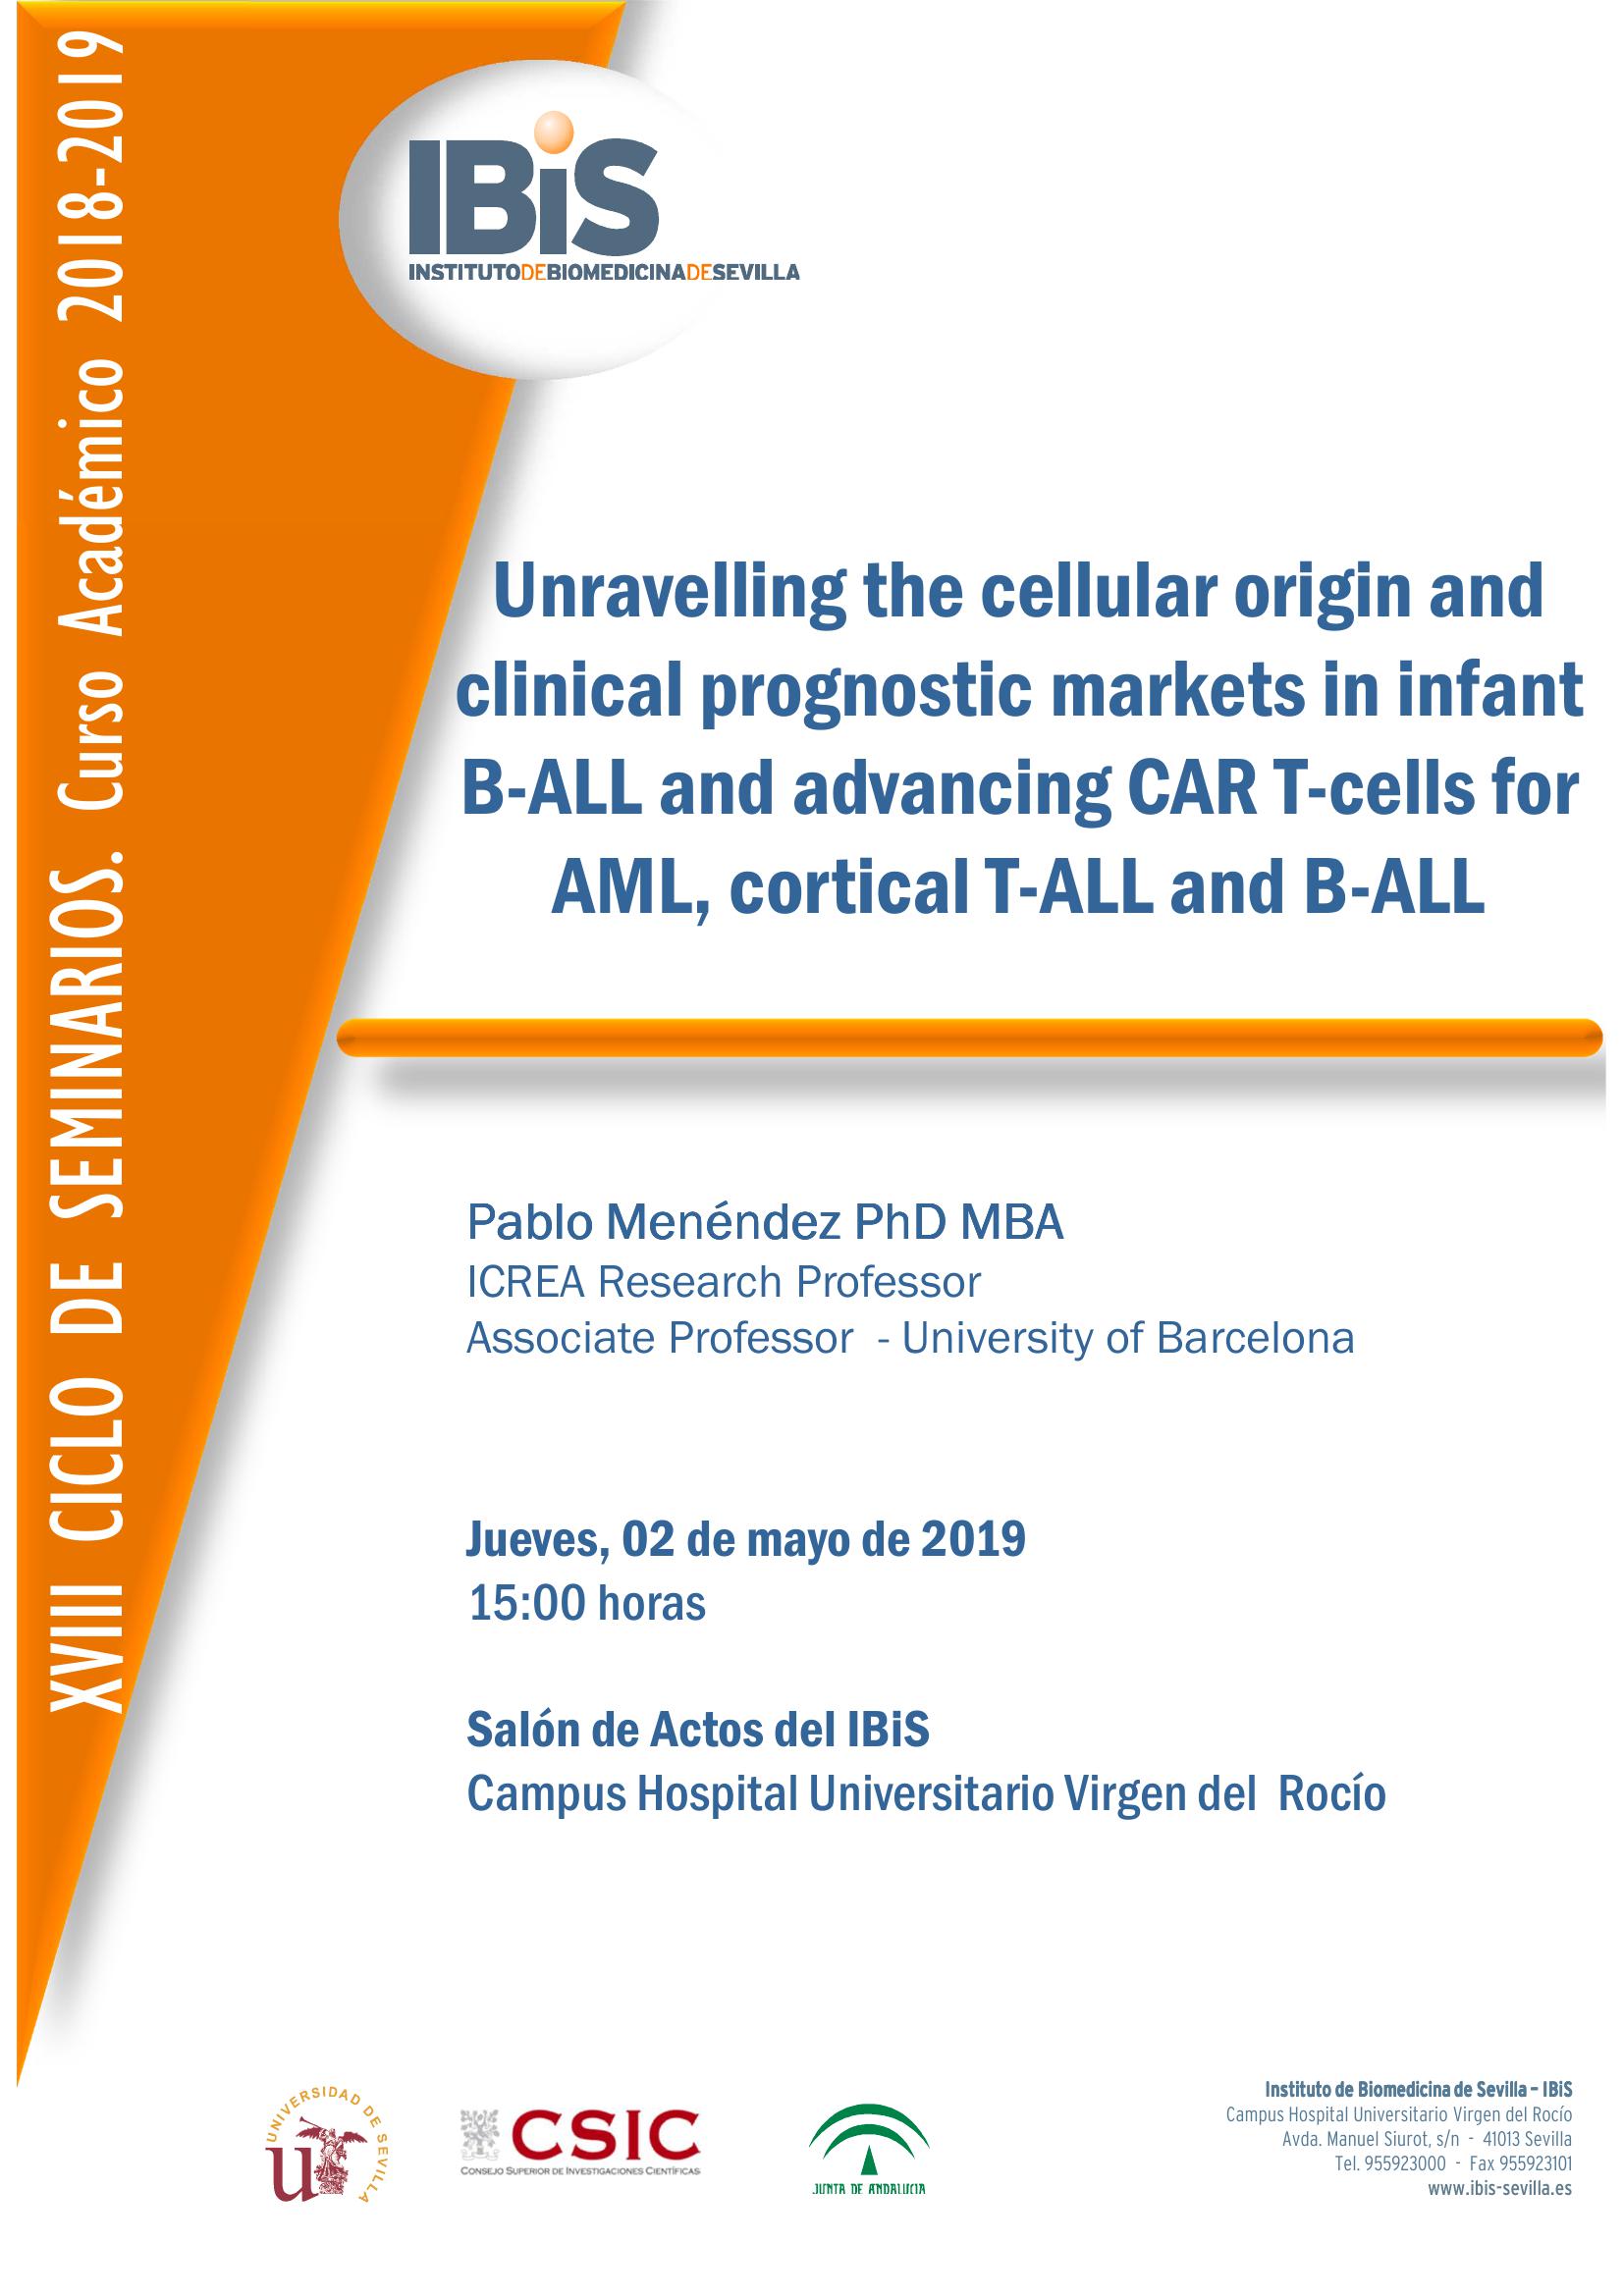 Poster: Unravelling the cellular origin and clinical prognostic markets in infant B-ALL and advancing CAR T-cells for AML, cortical T-ALL and B-ALL